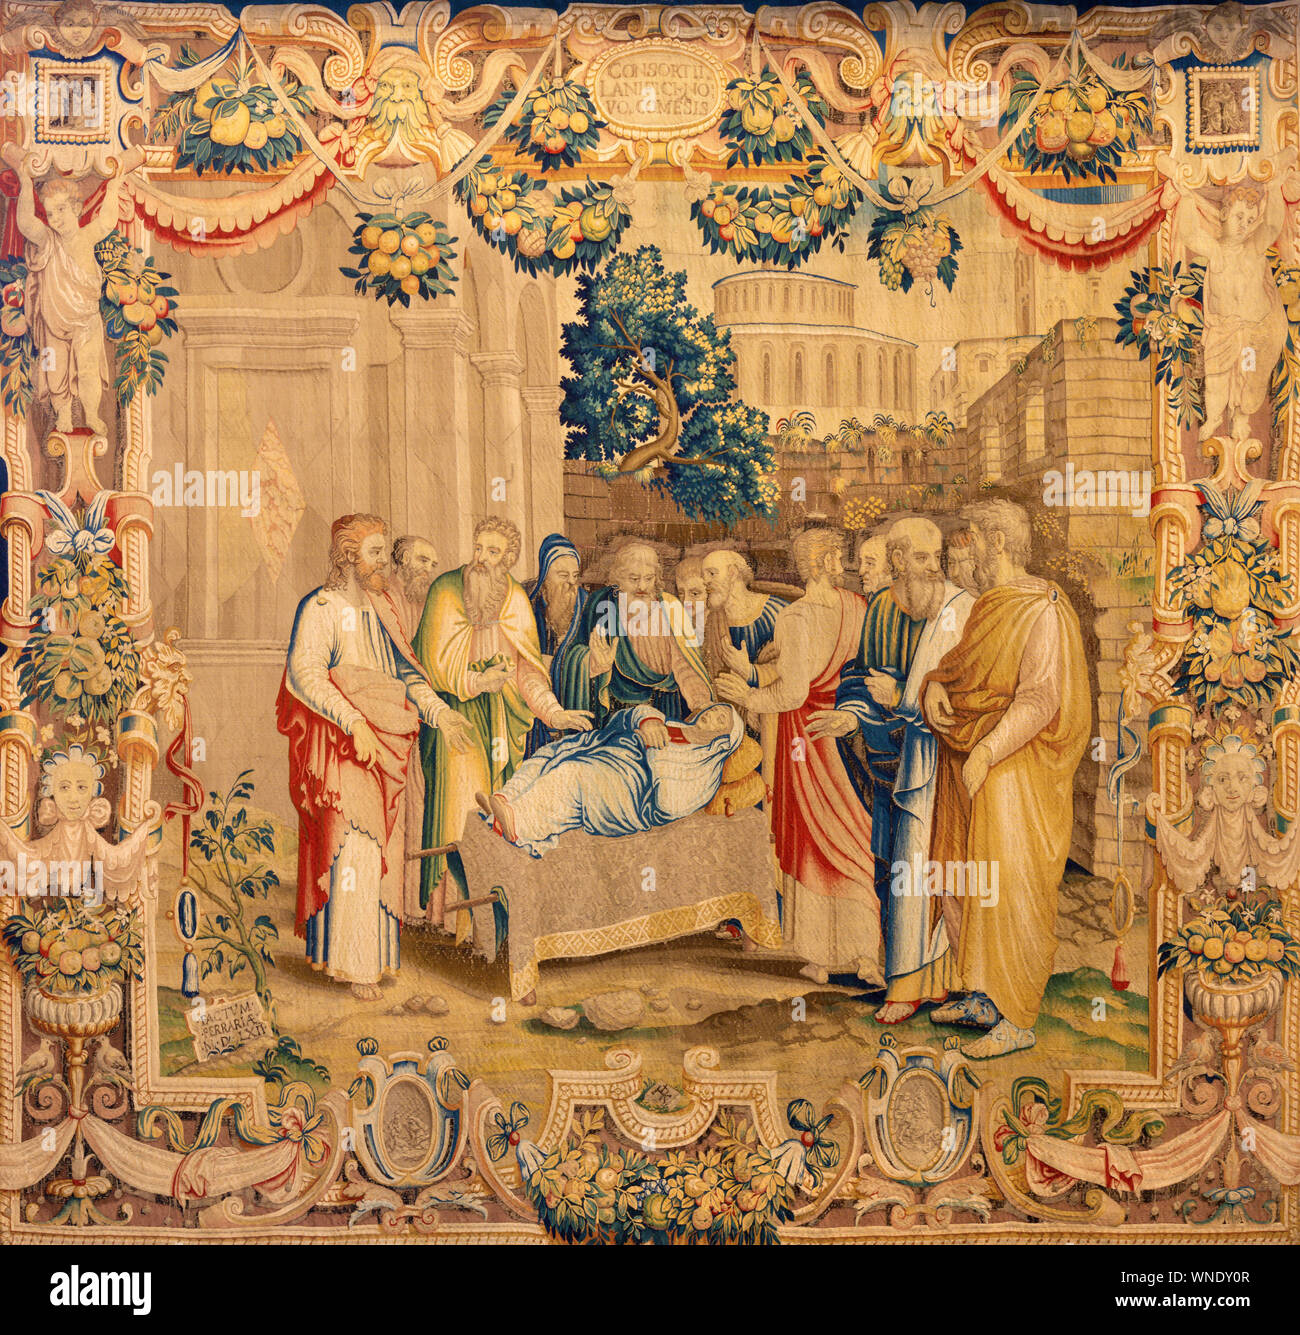 COMO, ITALY - MAY 8, 2015: The tapestry of Dormition of Virin Mary in Cathedral (Duomo di Conmo) by Giuseppe Arcimboldo (1558). Stock Photo